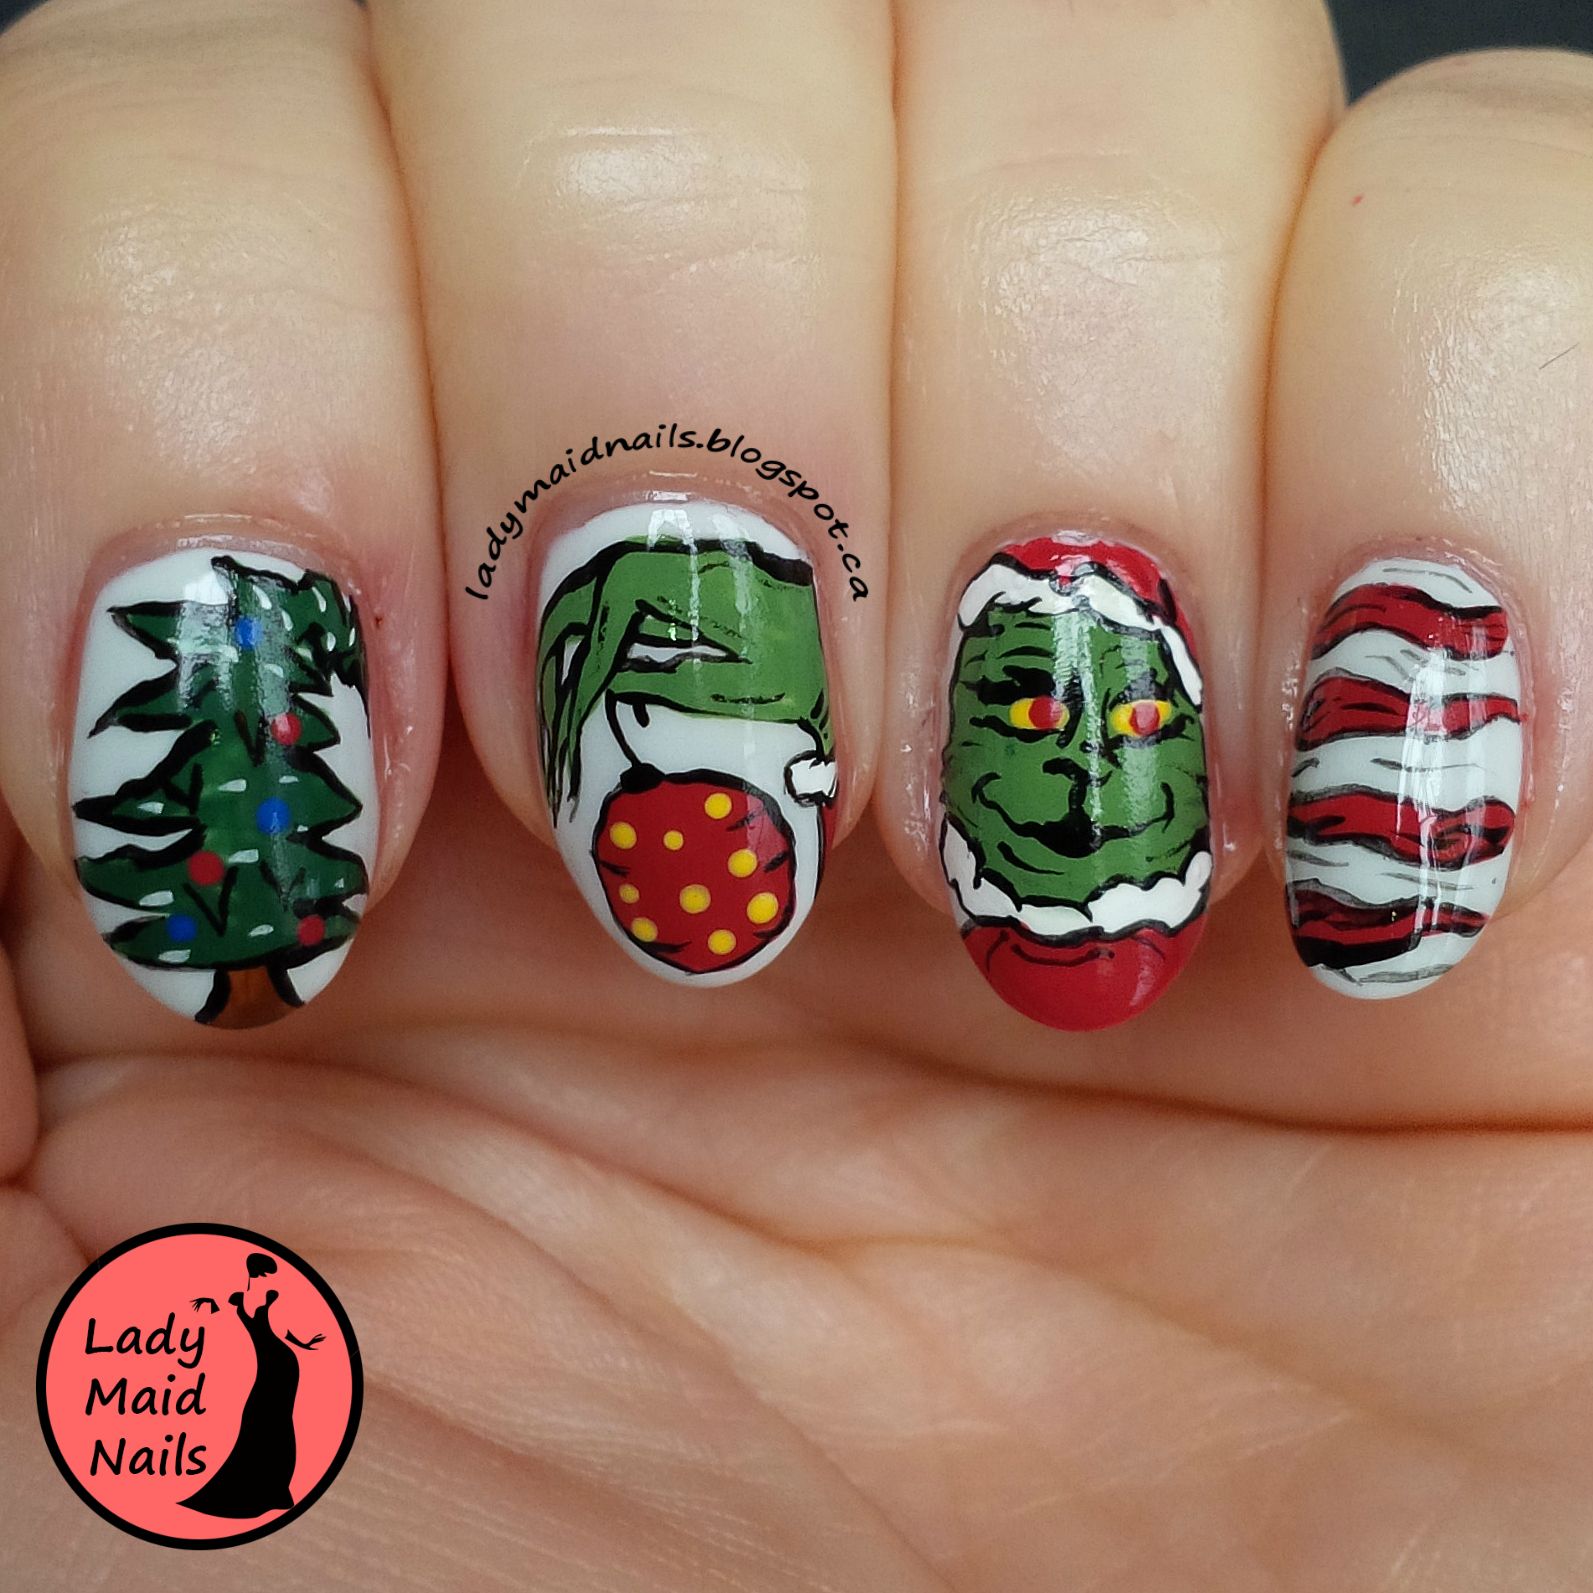 Lady Maid Nails: Freestyle Christmas Nails!